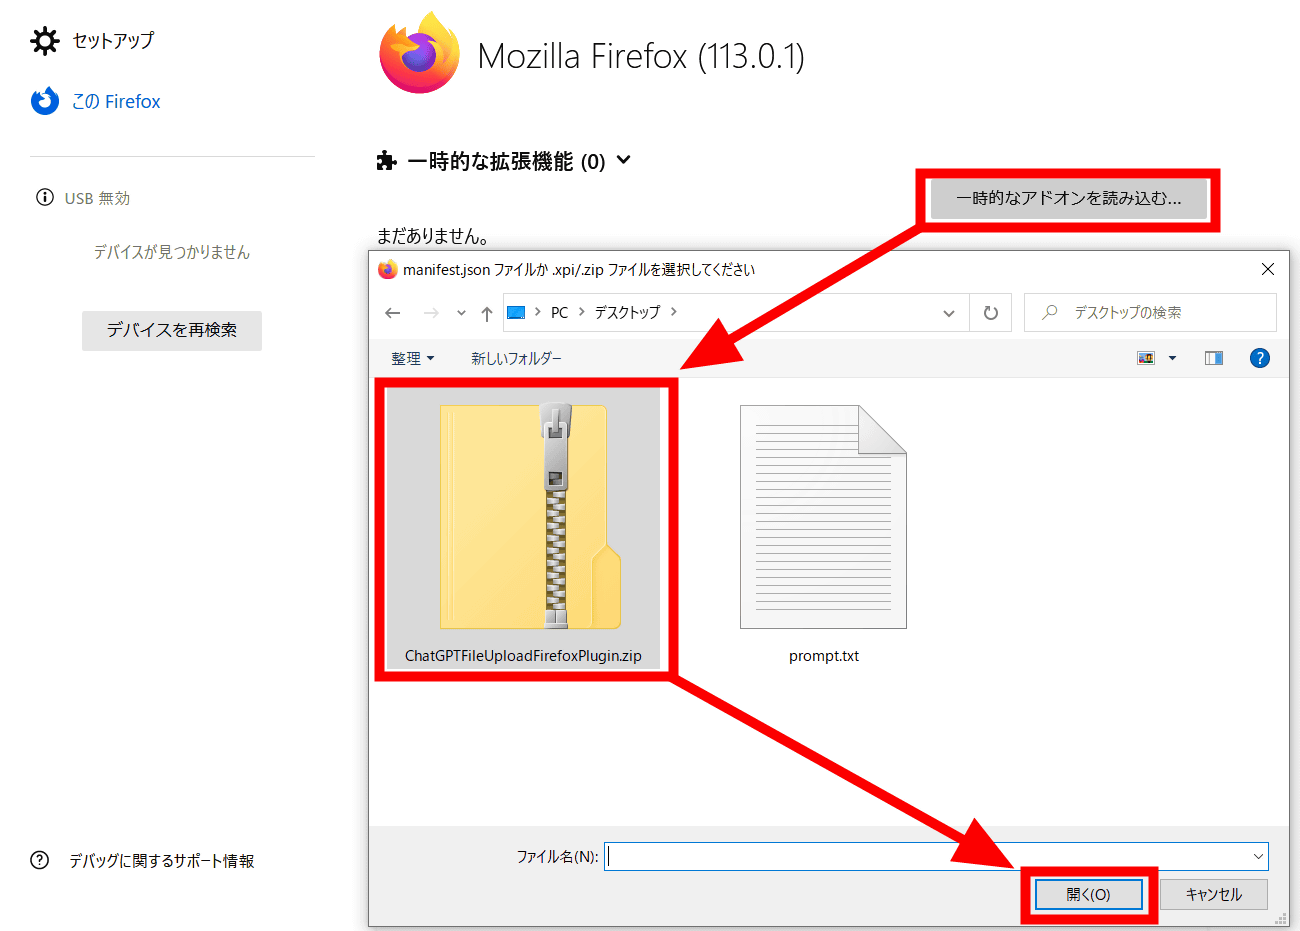 Temporarily load an extension in Firefox 